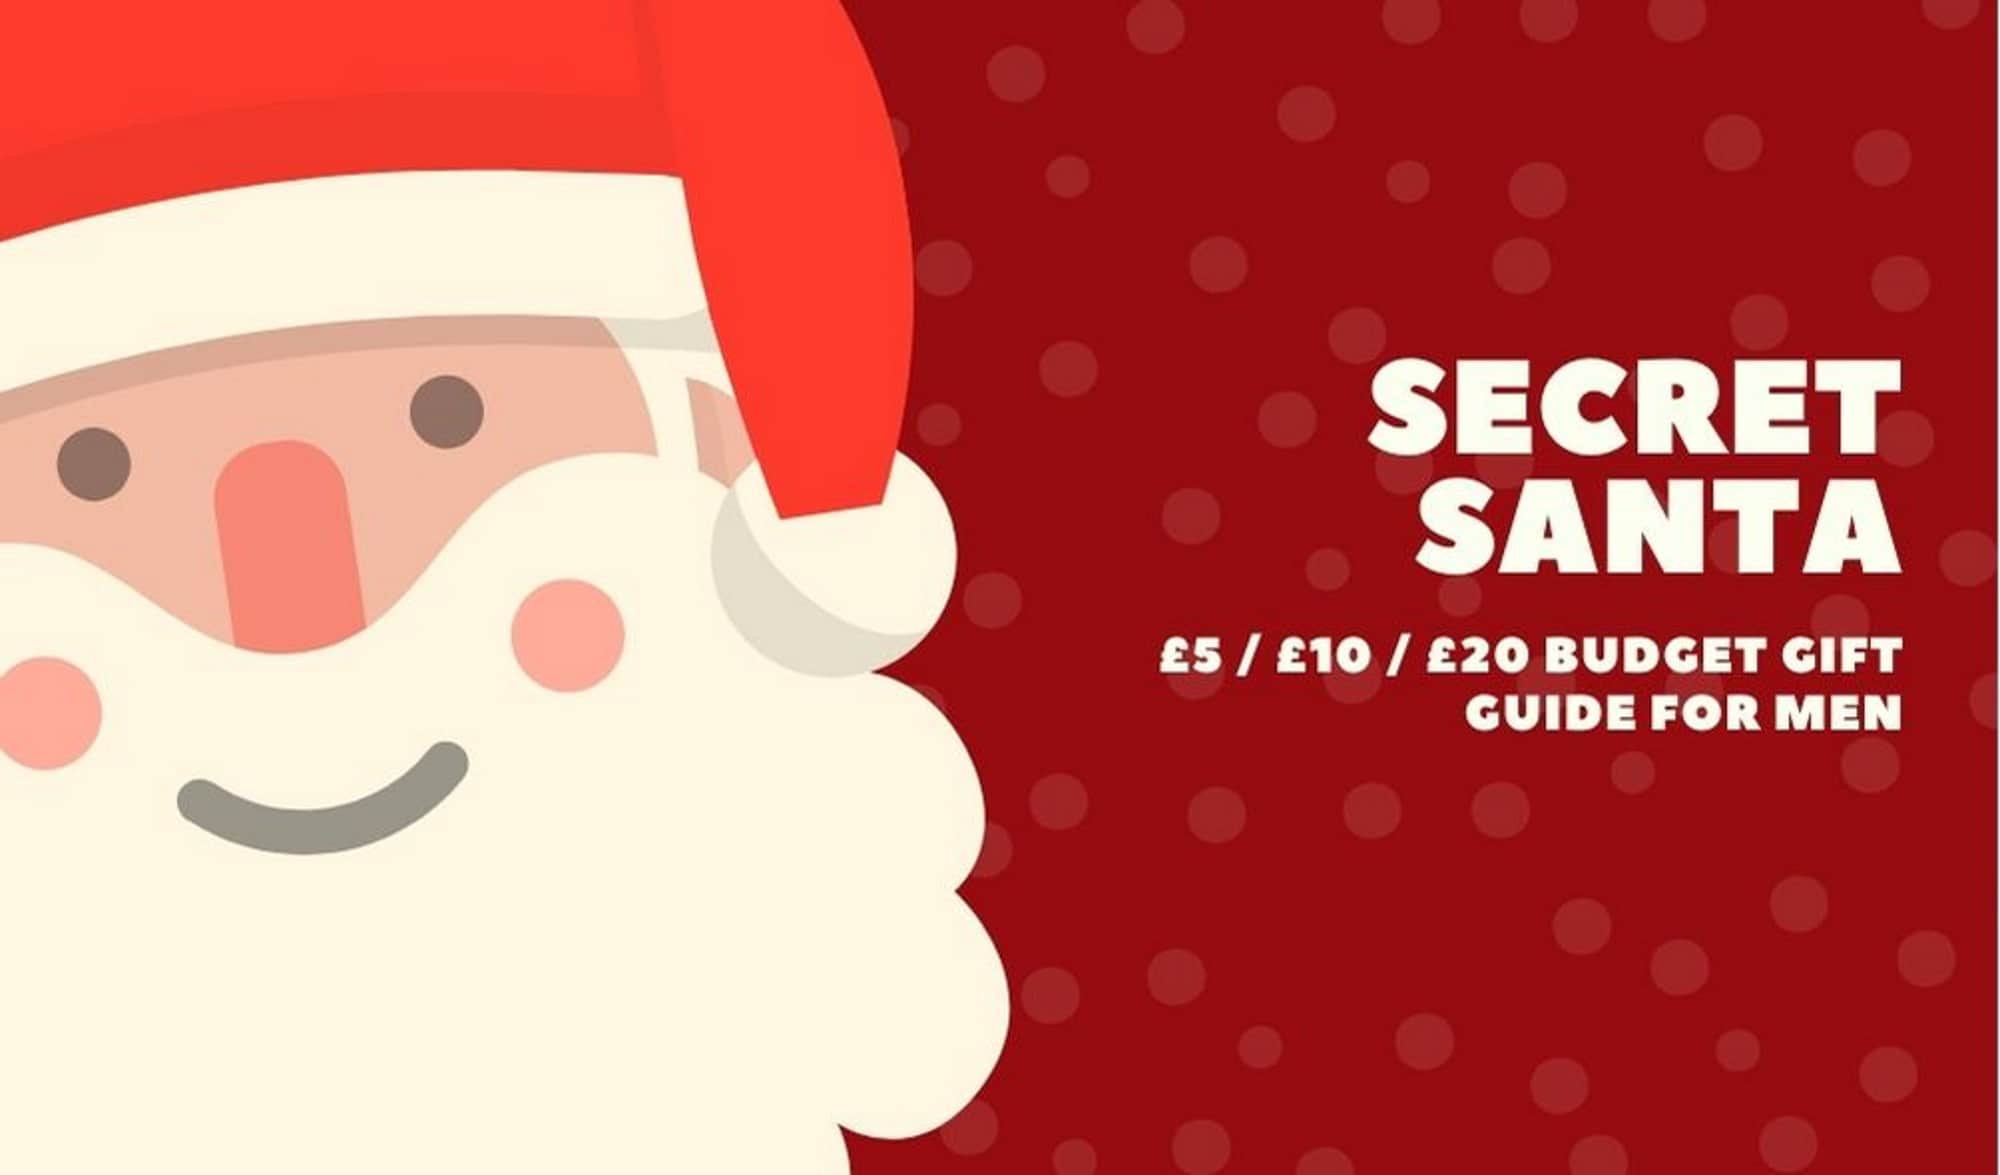 What are good secret Santa gifts for guys? £5 / £10 / £20 budget gift guide for men